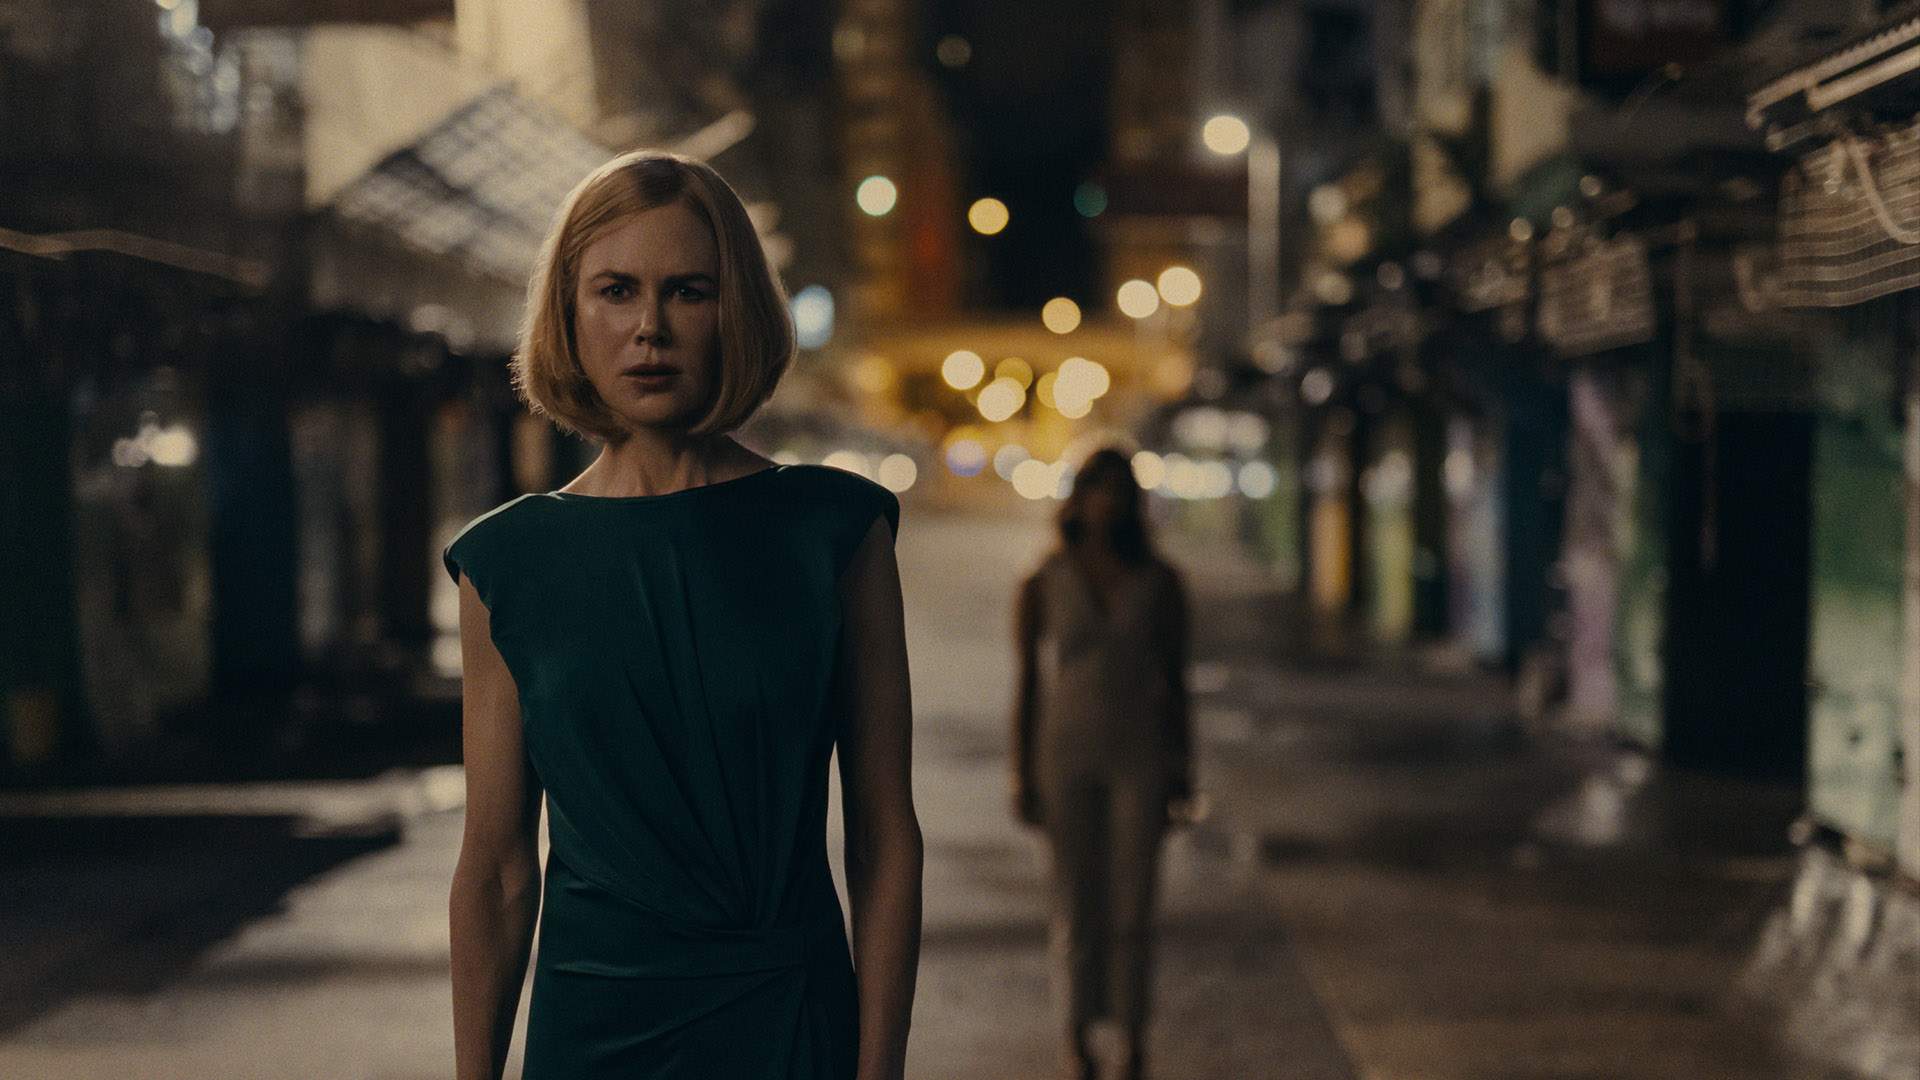 Haunting in Hong Kong: Nicole Kidman-Led Miniseries 'Expats' Is Another Must-See From 'The Farewell' Director Lulu Wang